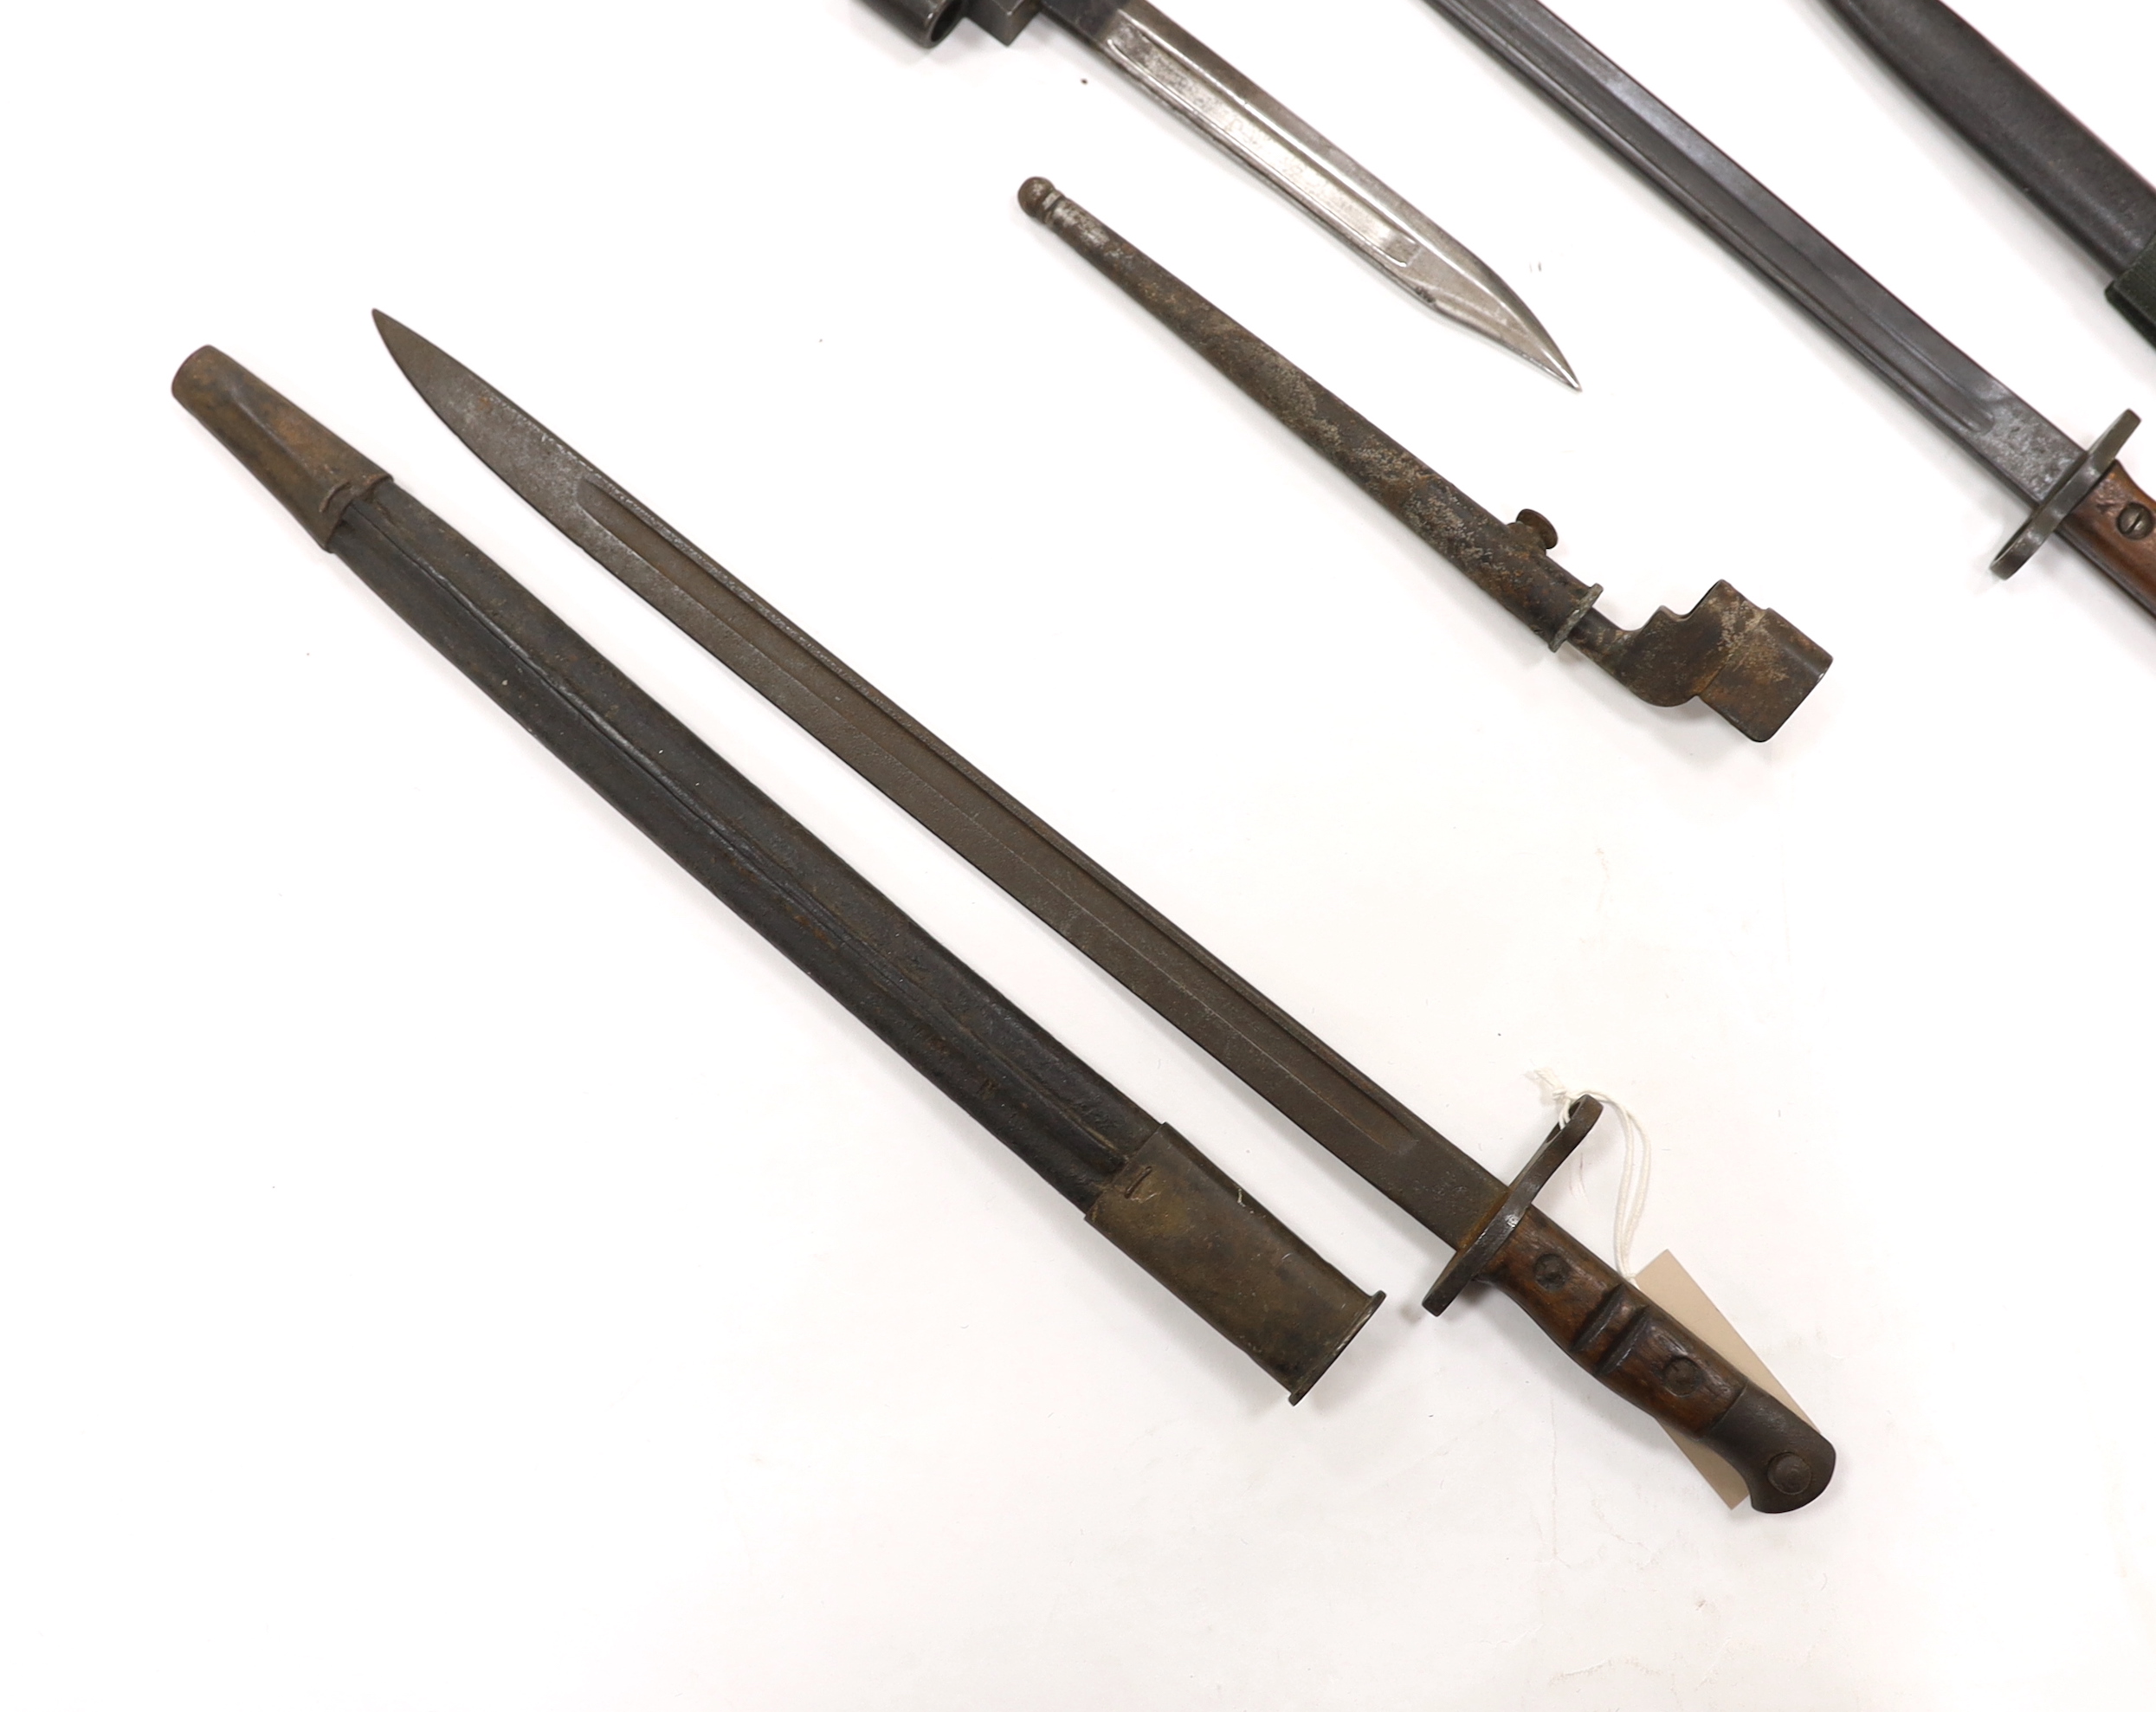 Six bayonets; an American Remington bayonet dated 1917 in its leather scabbard, a British 1907 bayonet with scabbard missing, and four assorted spike bayonets